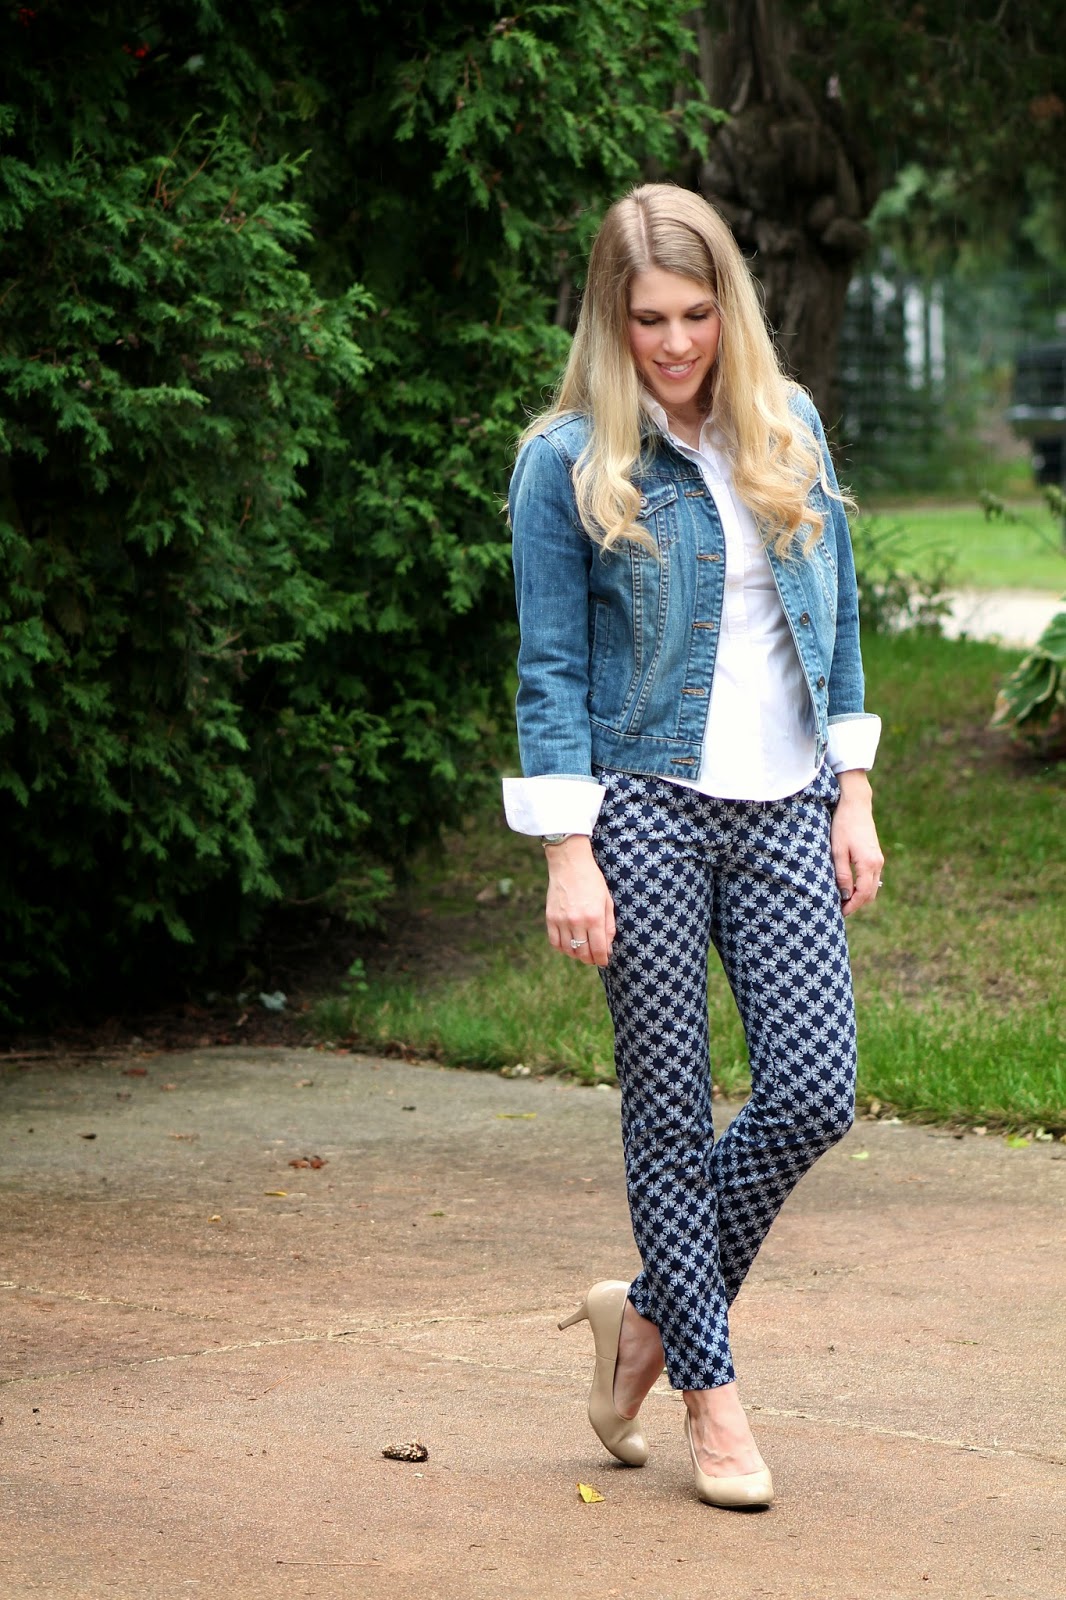 Confident Twosday: Denim Jacket and Printed Pants - I do deClaire